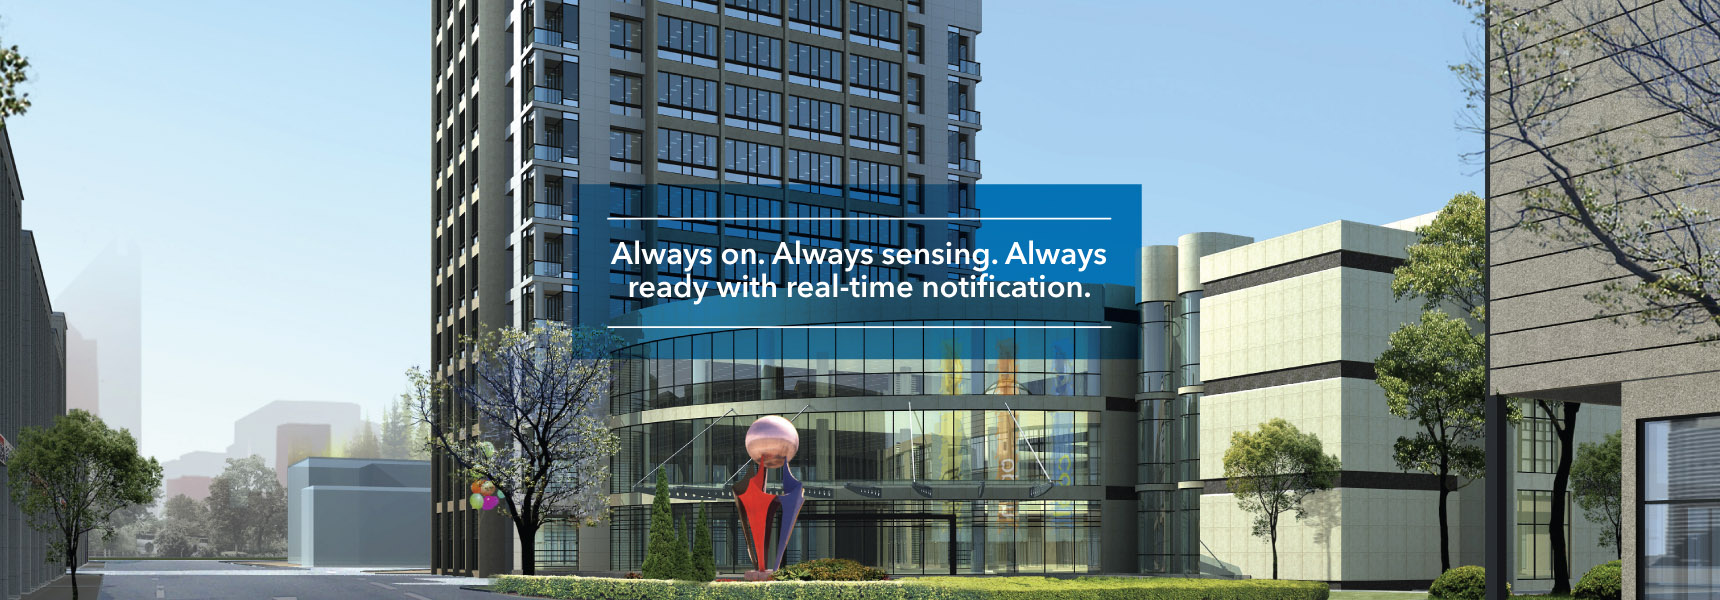 Always on. Always sensing. Always ready with real-time notification.